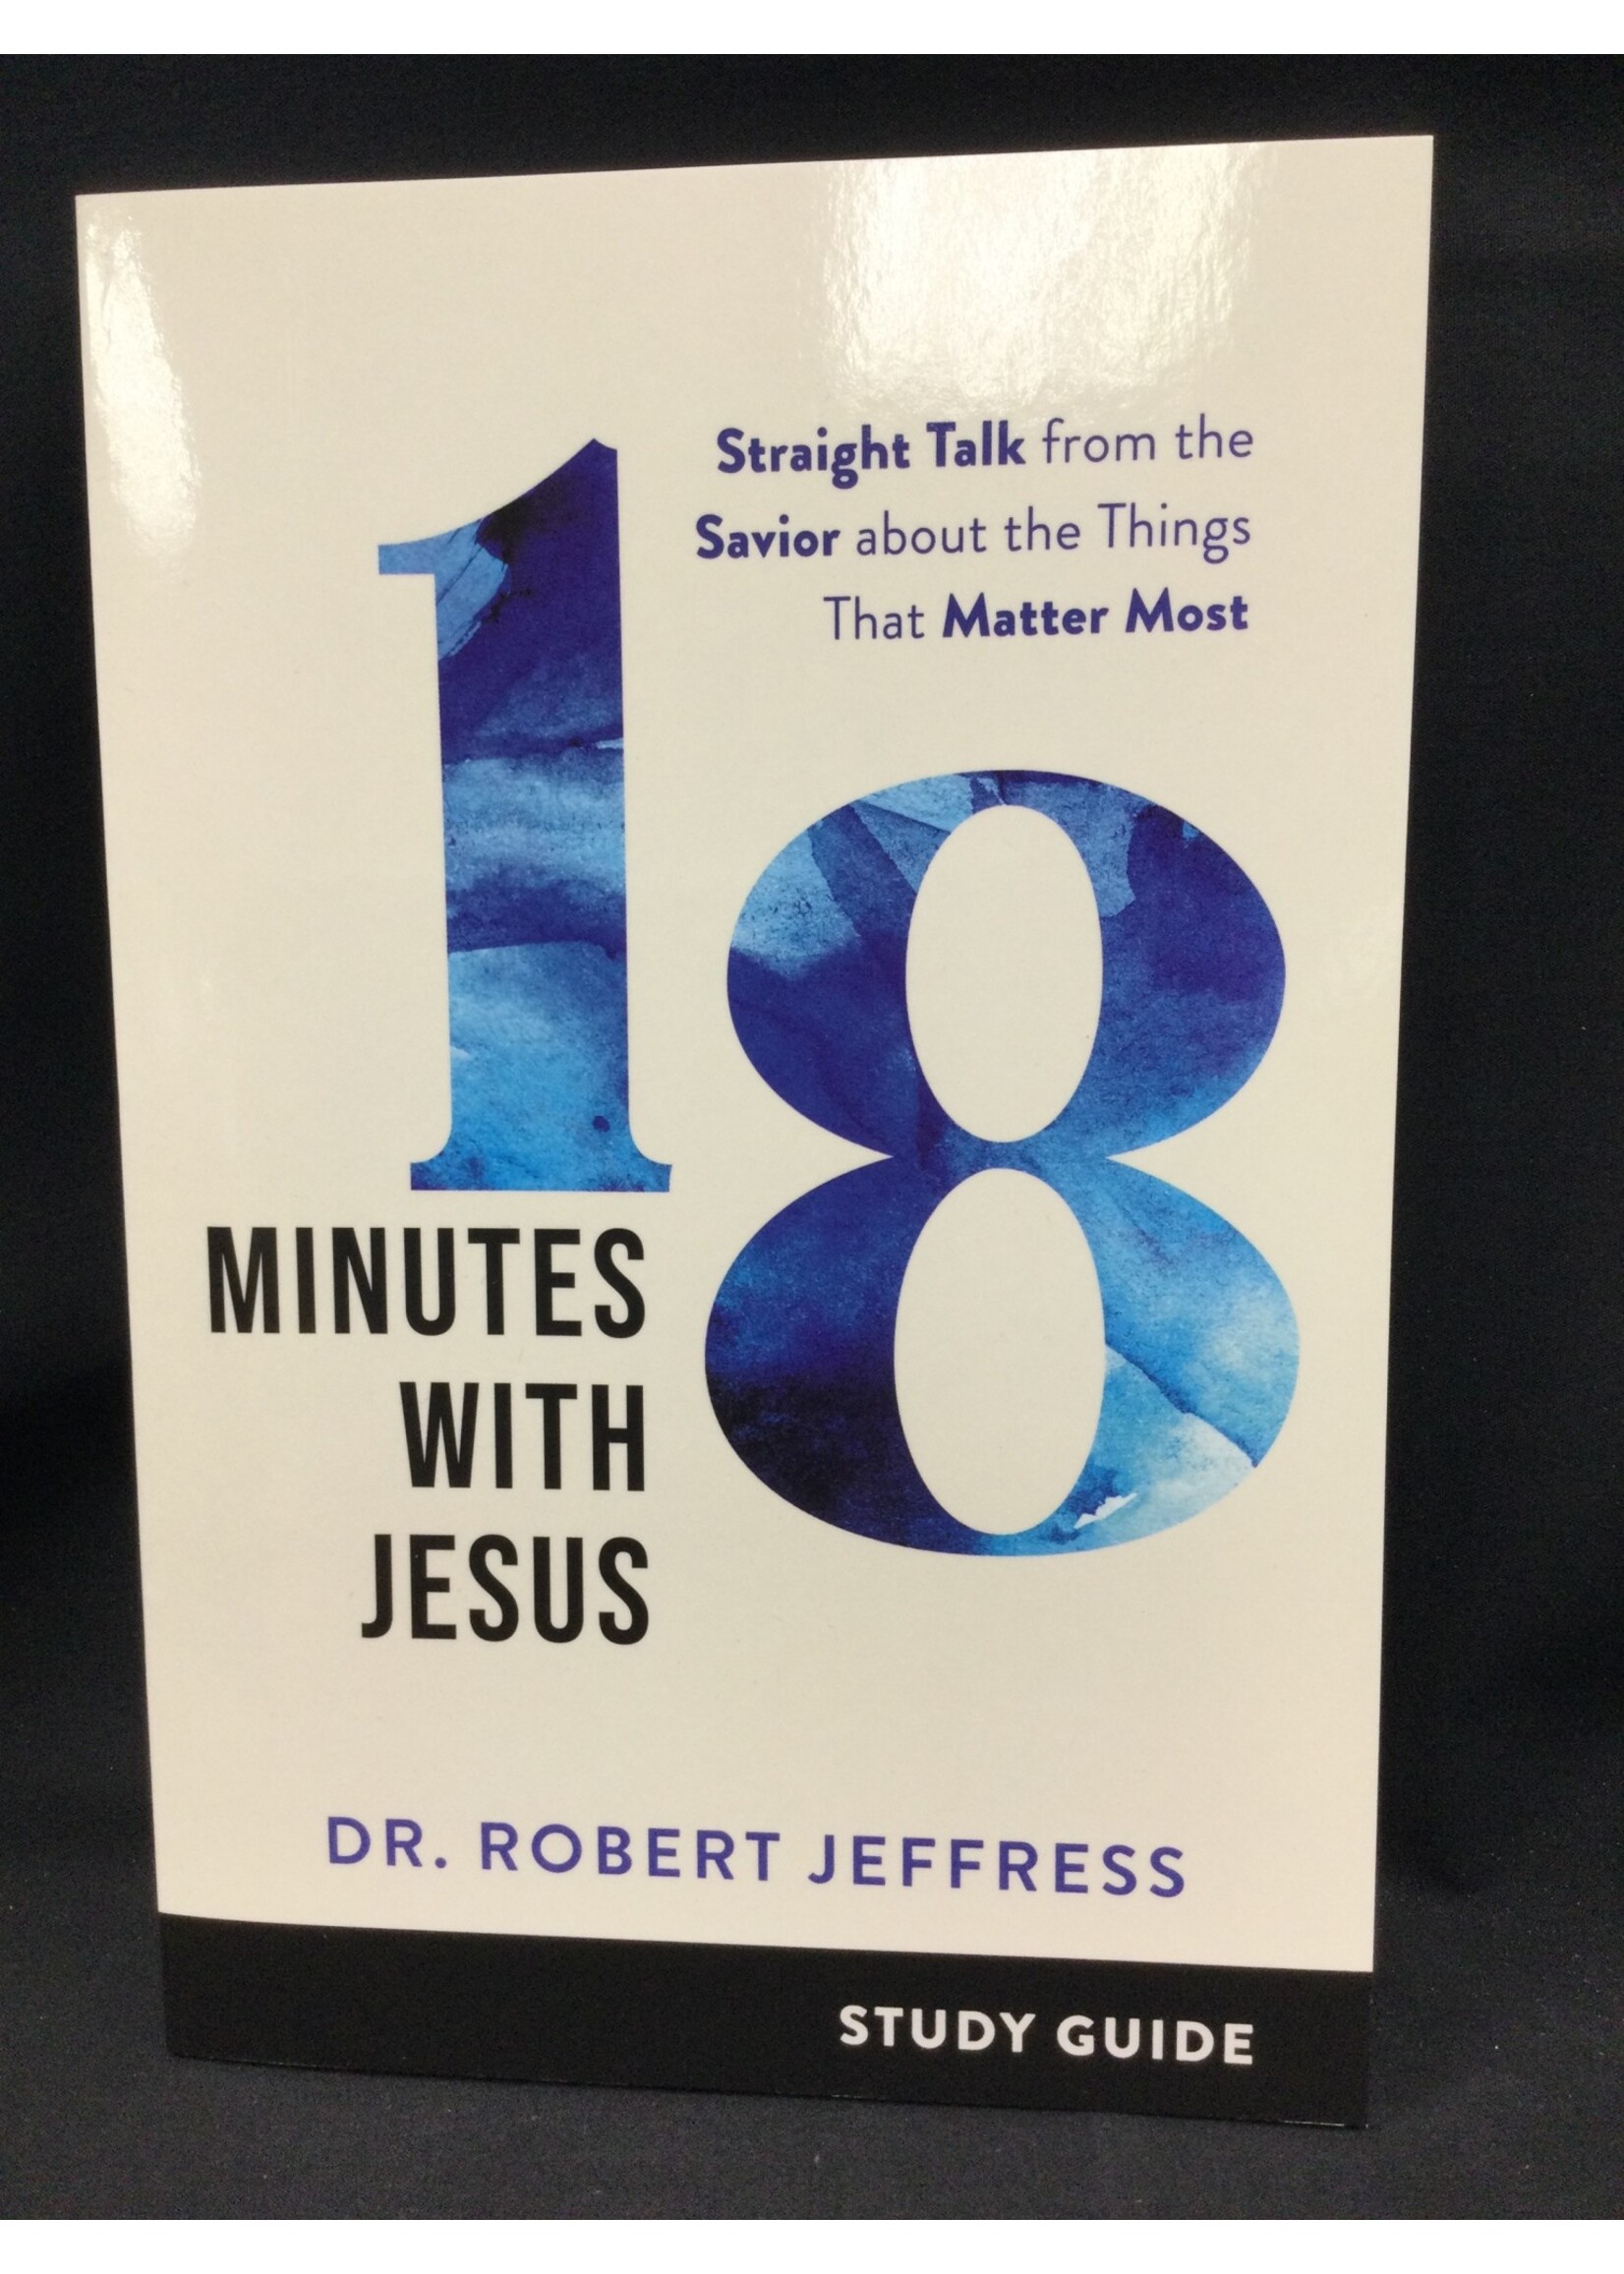 18 Minutes with Jesus (study guide)